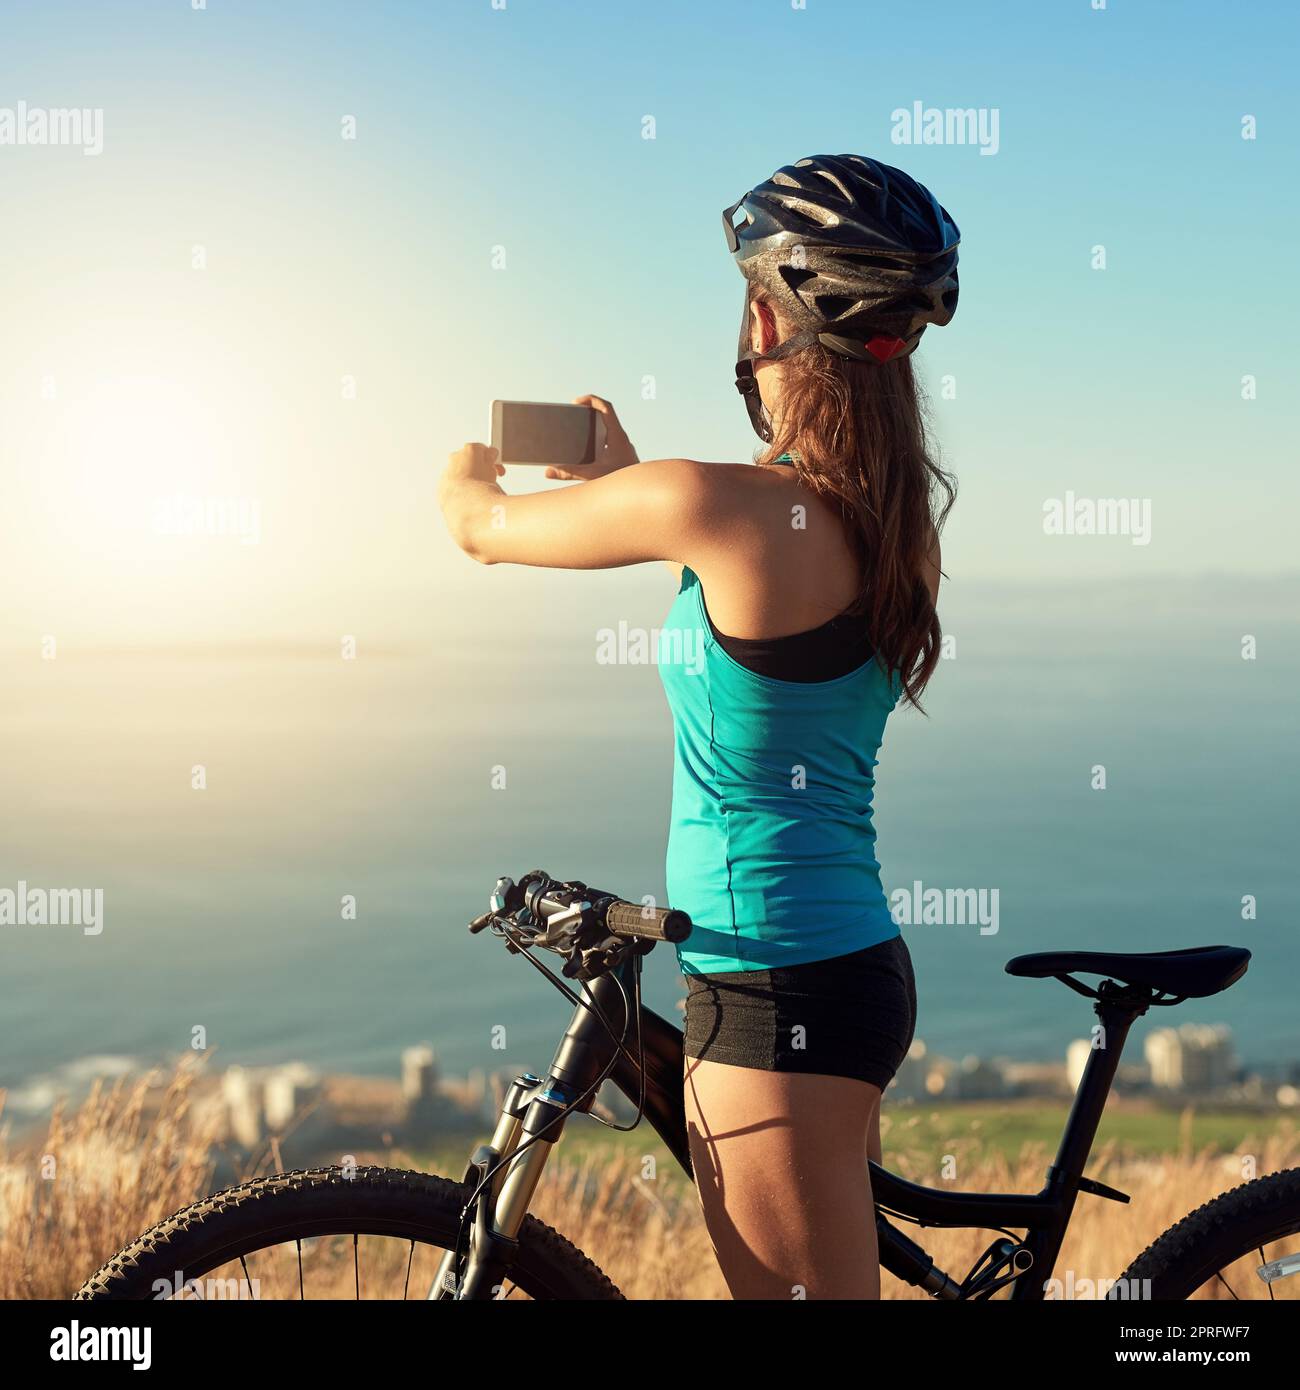 Mountain biking is an escape. a young woman taking a picture of the beautiful scenery while out mountain biking. Stock Photo